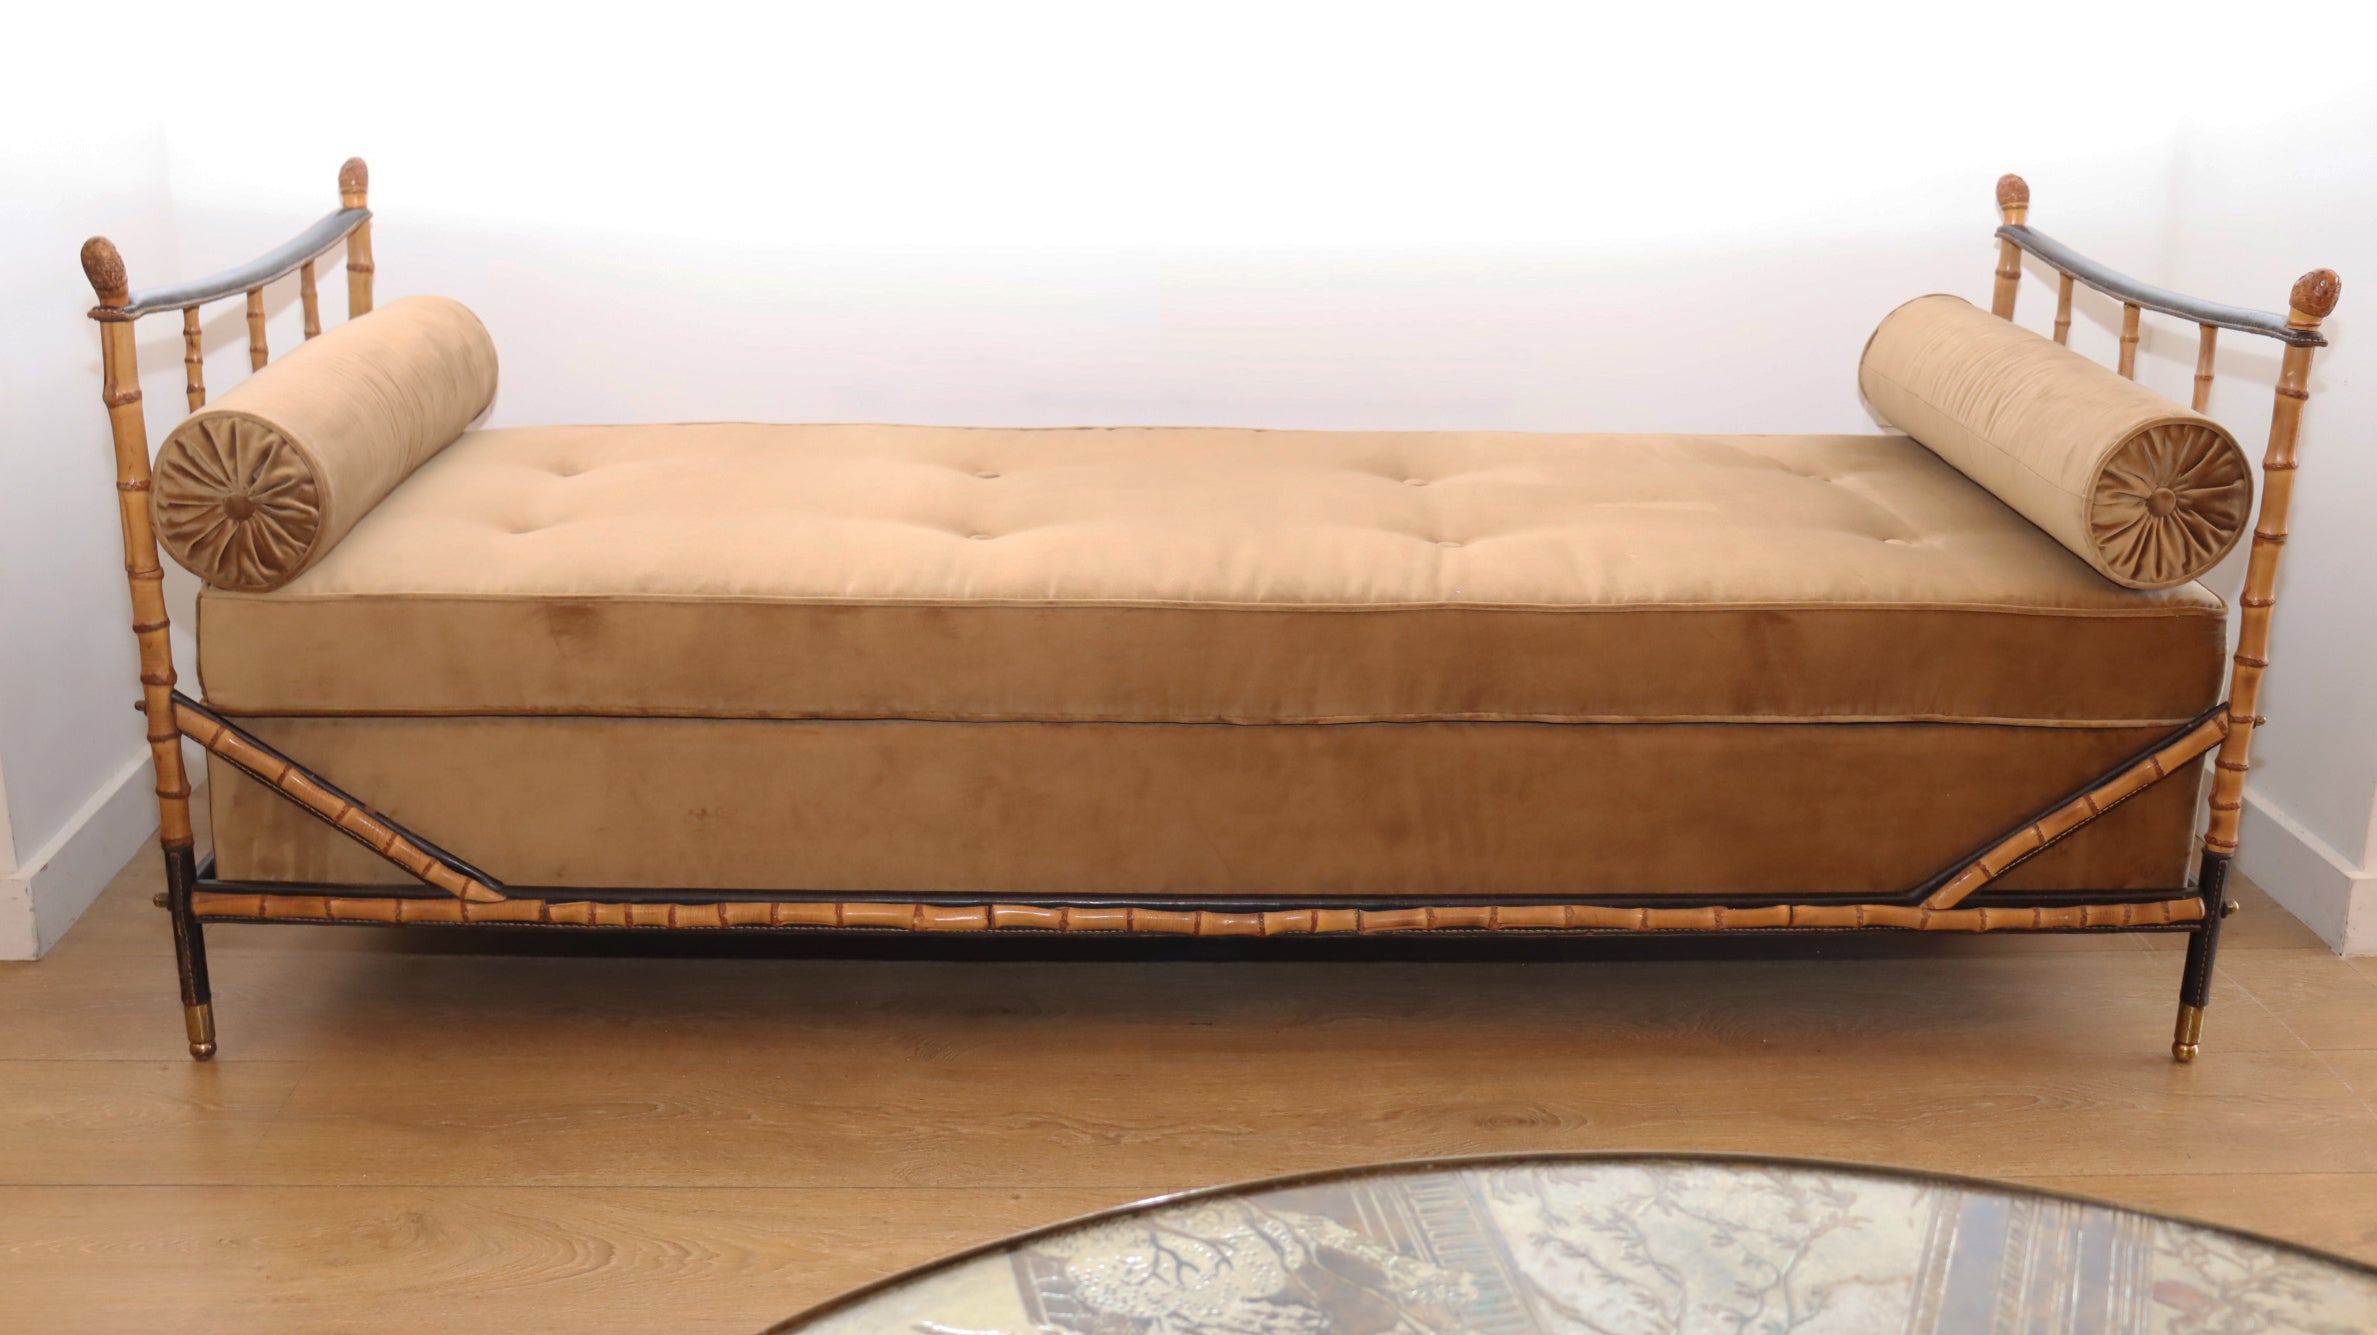 Daybed bamboo and black stitched leather by Jacques Adnet
France circa 1950
Very rare example to be found, newly upholstered with a gilded velvet
Excellent condition, wear consistent with age and use
Available to view in-situ in our Miami gallery